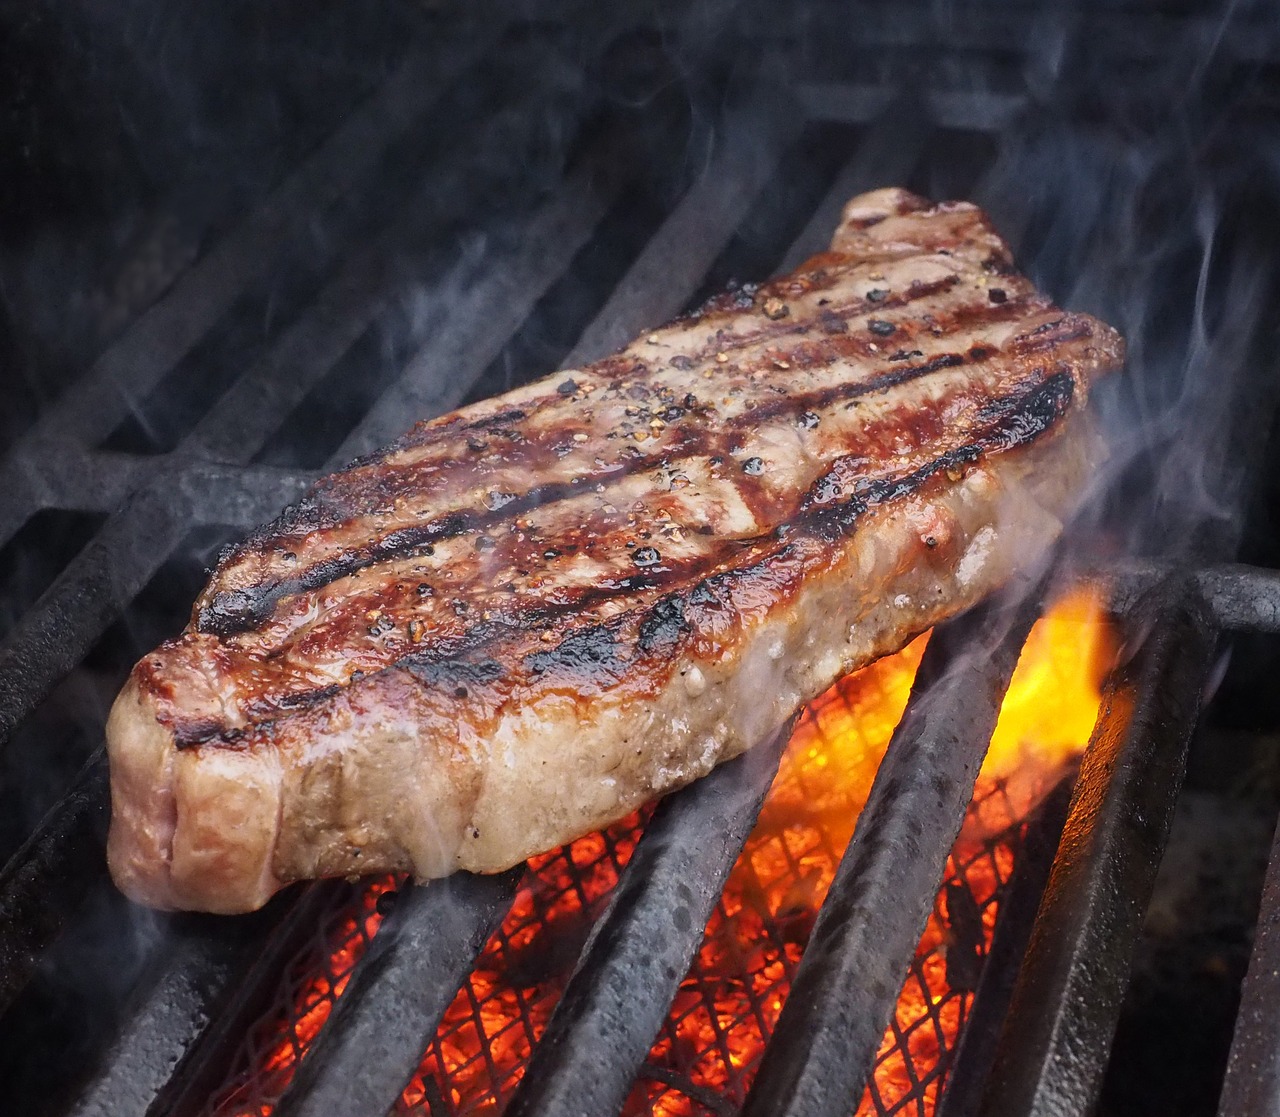 How To Get Your Barbecue Ready For the 4th of July